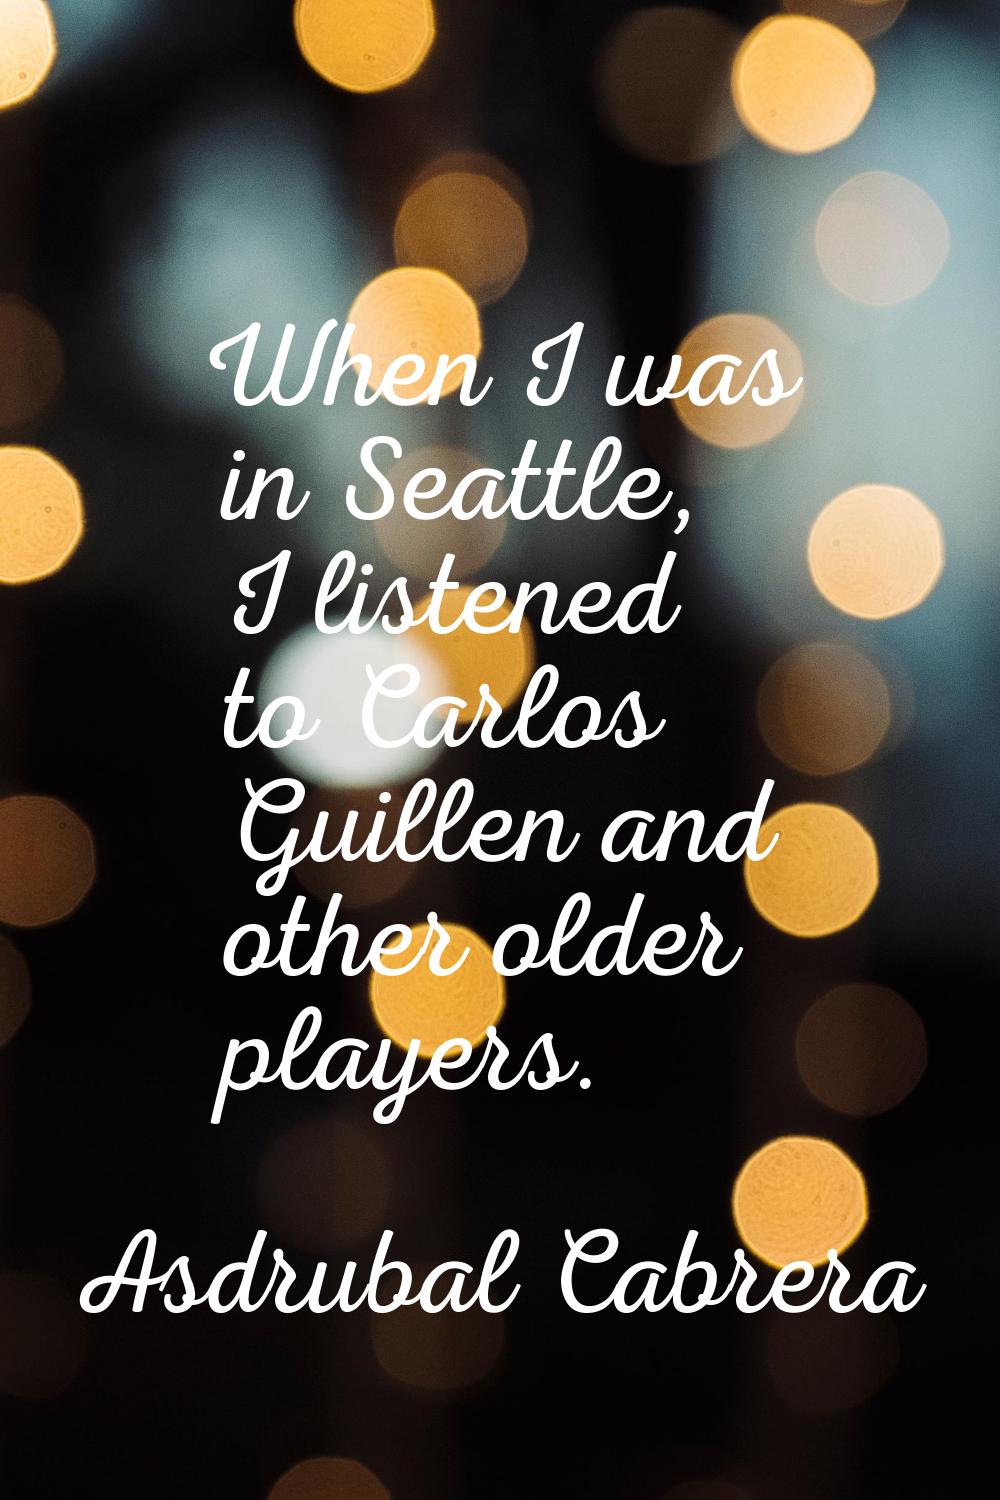 When I was in Seattle, I listened to Carlos Guillen and other older players.